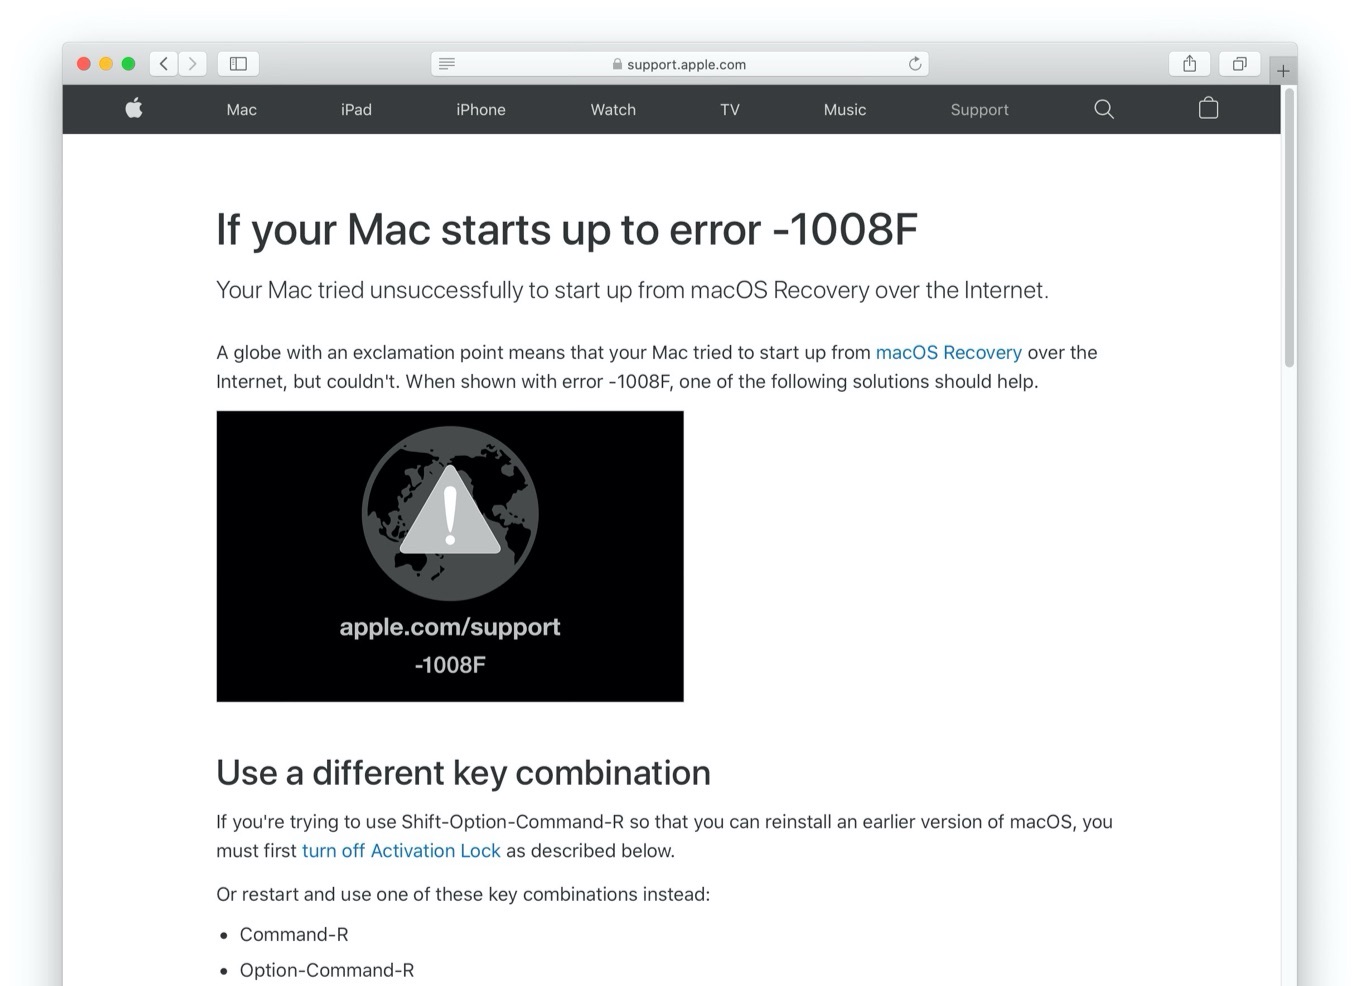 If your Mac starts up to error -1008F